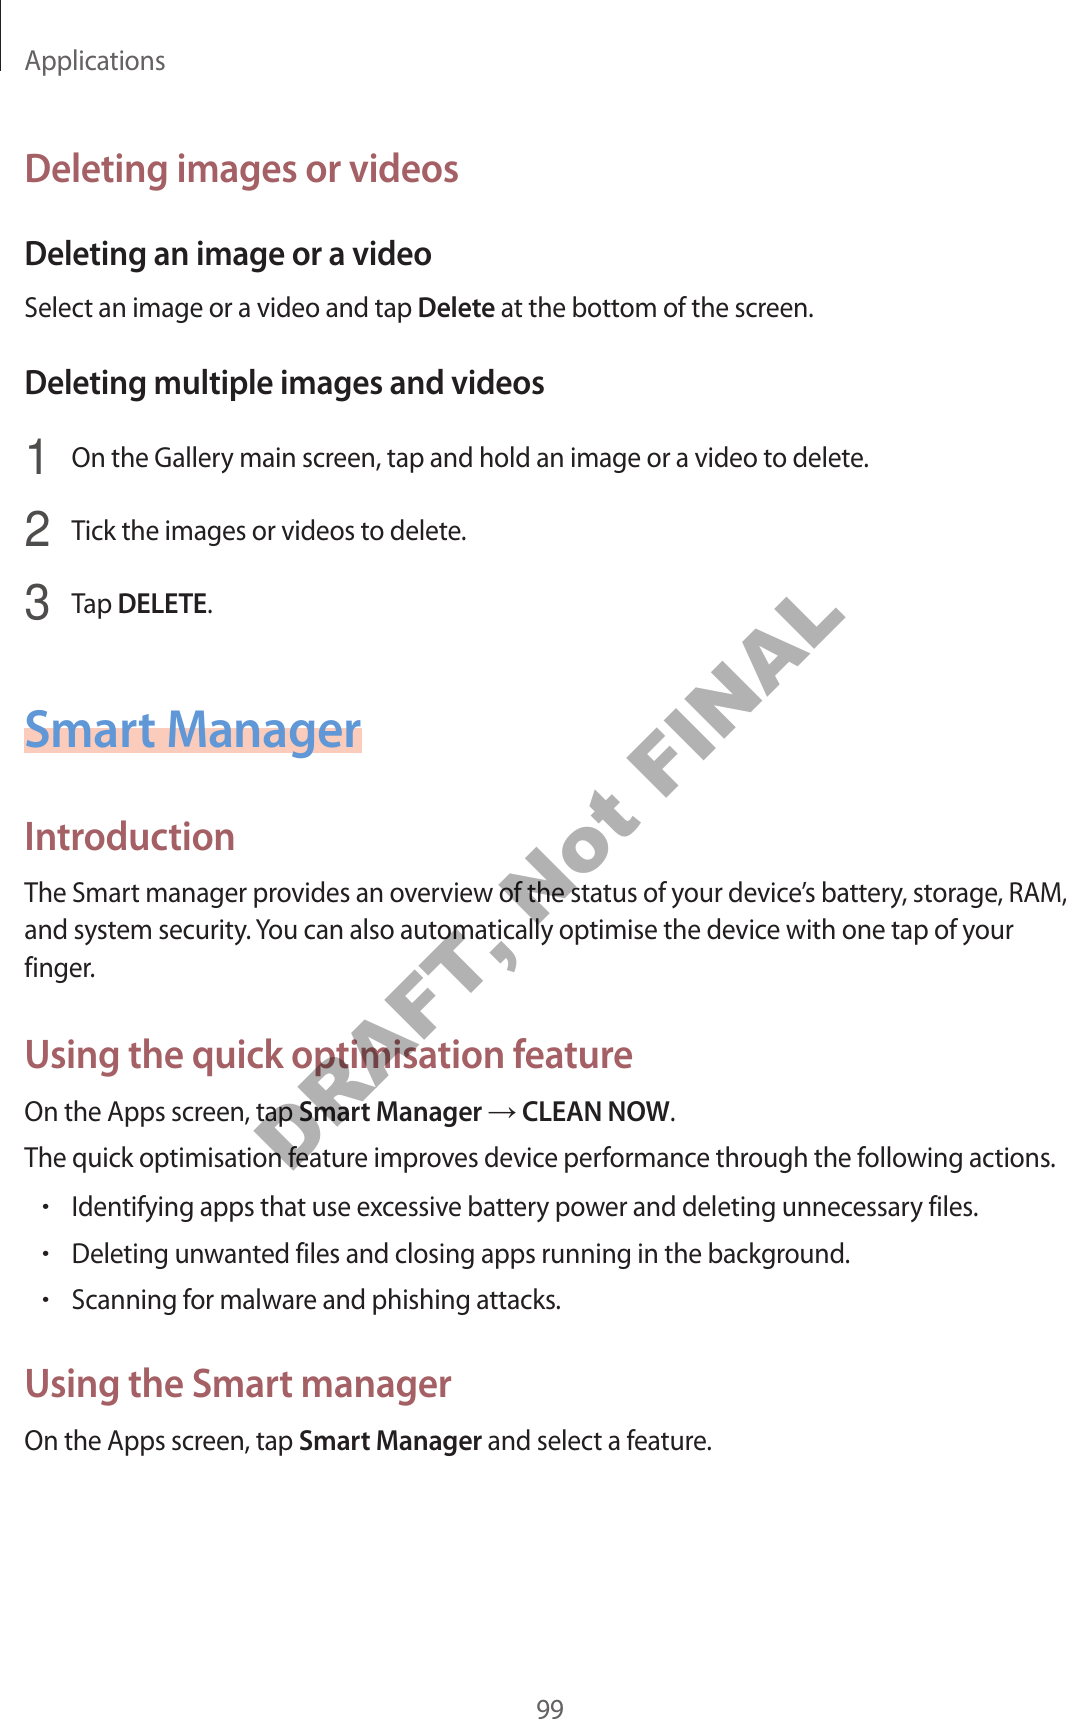 Applications99Deleting images or videosDeleting an image or a videoSelect an image or a video and tap Delete at the bottom of the screen.Deleting multiple images and videos1  On the Gallery main screen, tap and hold an image or a video to delete.2  Tick the images or videos to delete.3  Tap DELETE.Smart ManagerIntroductionThe Smart manager provides an overview of the status of your device’s battery, storage, RAM, and system security. You can also automatically optimise the device with one tap of your finger.Using the quick optimisation featureOn the Apps screen, tap Smart Manager → CLEAN NOW.The quick optimisation feature improves device performance through the following actions.•Identifying apps that use excessive battery power and deleting unnecessary files.•Deleting unwanted files and closing apps running in the background.•Scanning for malware and phishing attacks.Using the Smart managerOn the Apps screen, tap Smart Manager and select a feature.DRAFT, Not FINAL